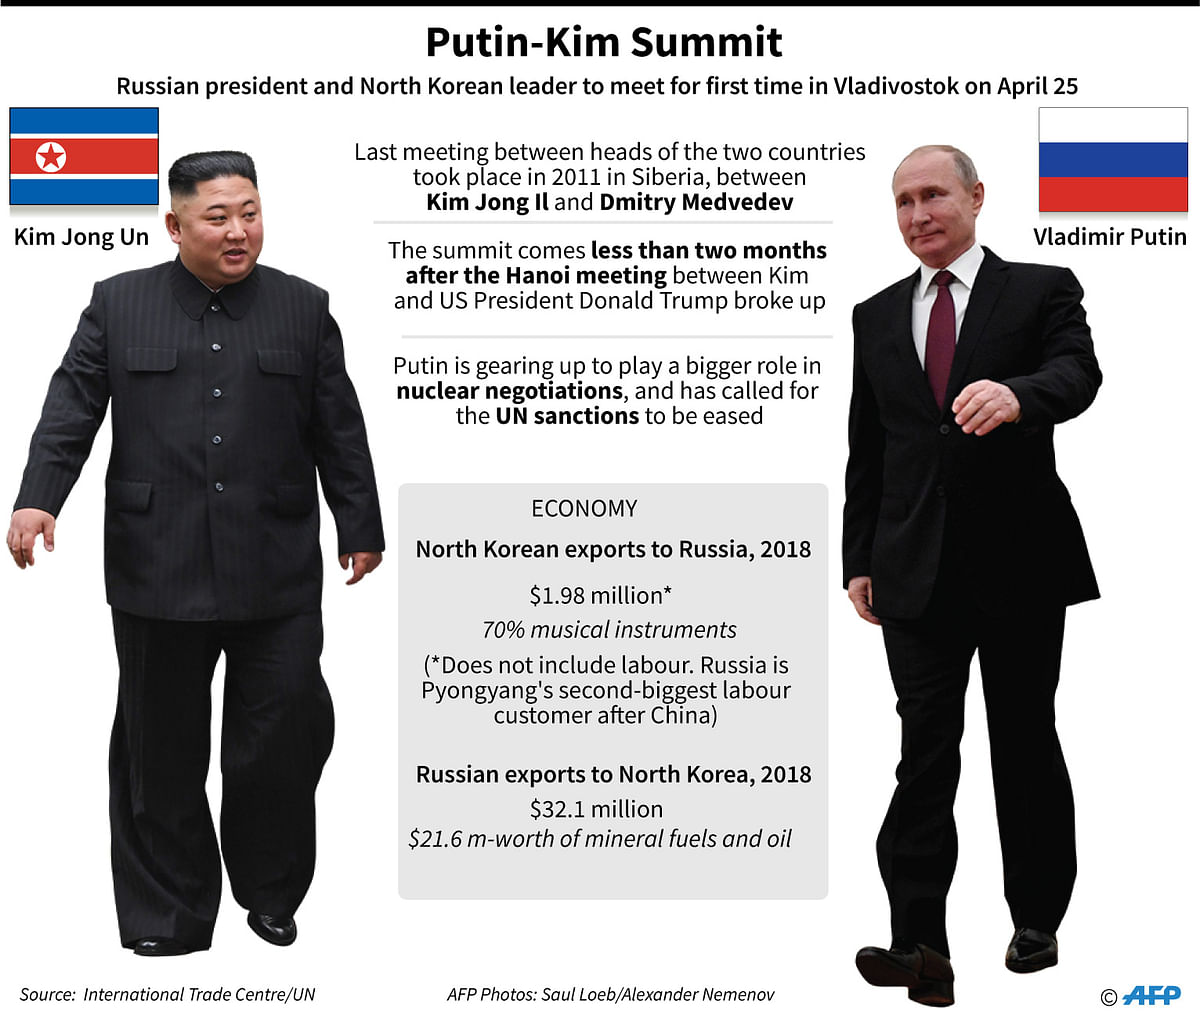 Graphic on talks between North Korean leader Kim Jong Un and Russia's president Vladimir Putin, to take place in Vladivostok on 25 April. Photo: AFP